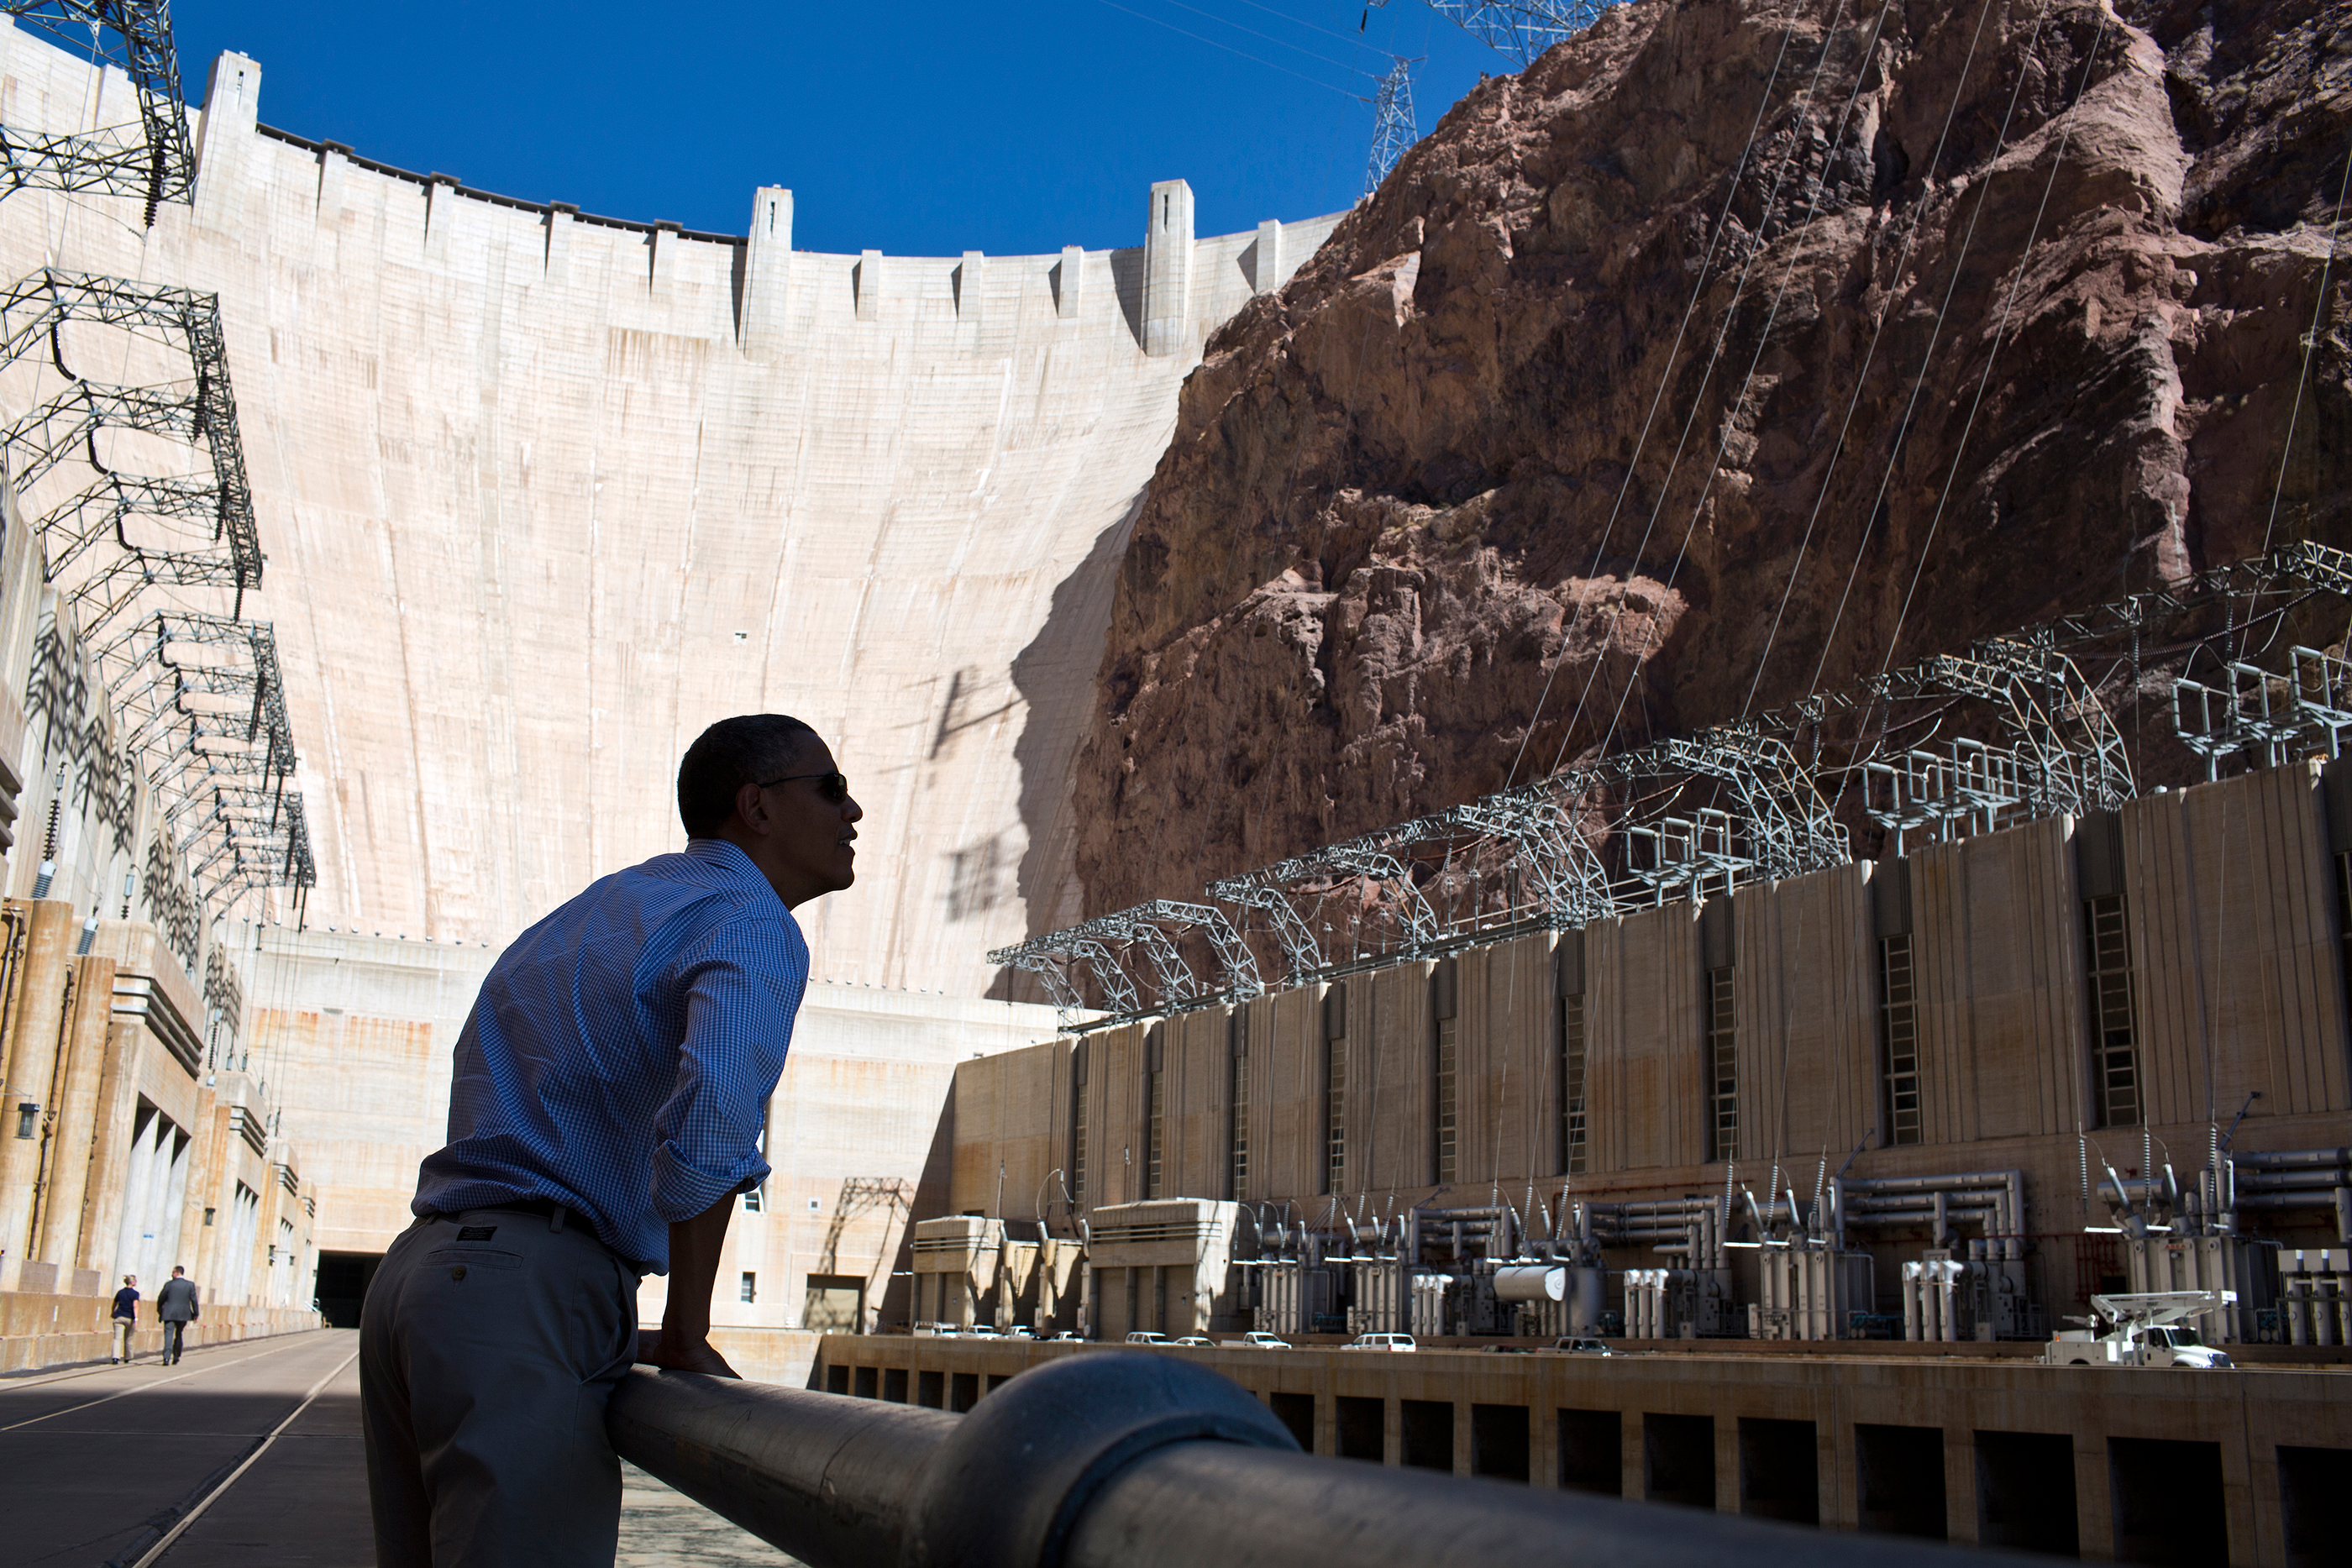 Nevada, Oct. 2, 2012. Viewing the Hoover Dam. (Official White House Photo by Pete Souza)